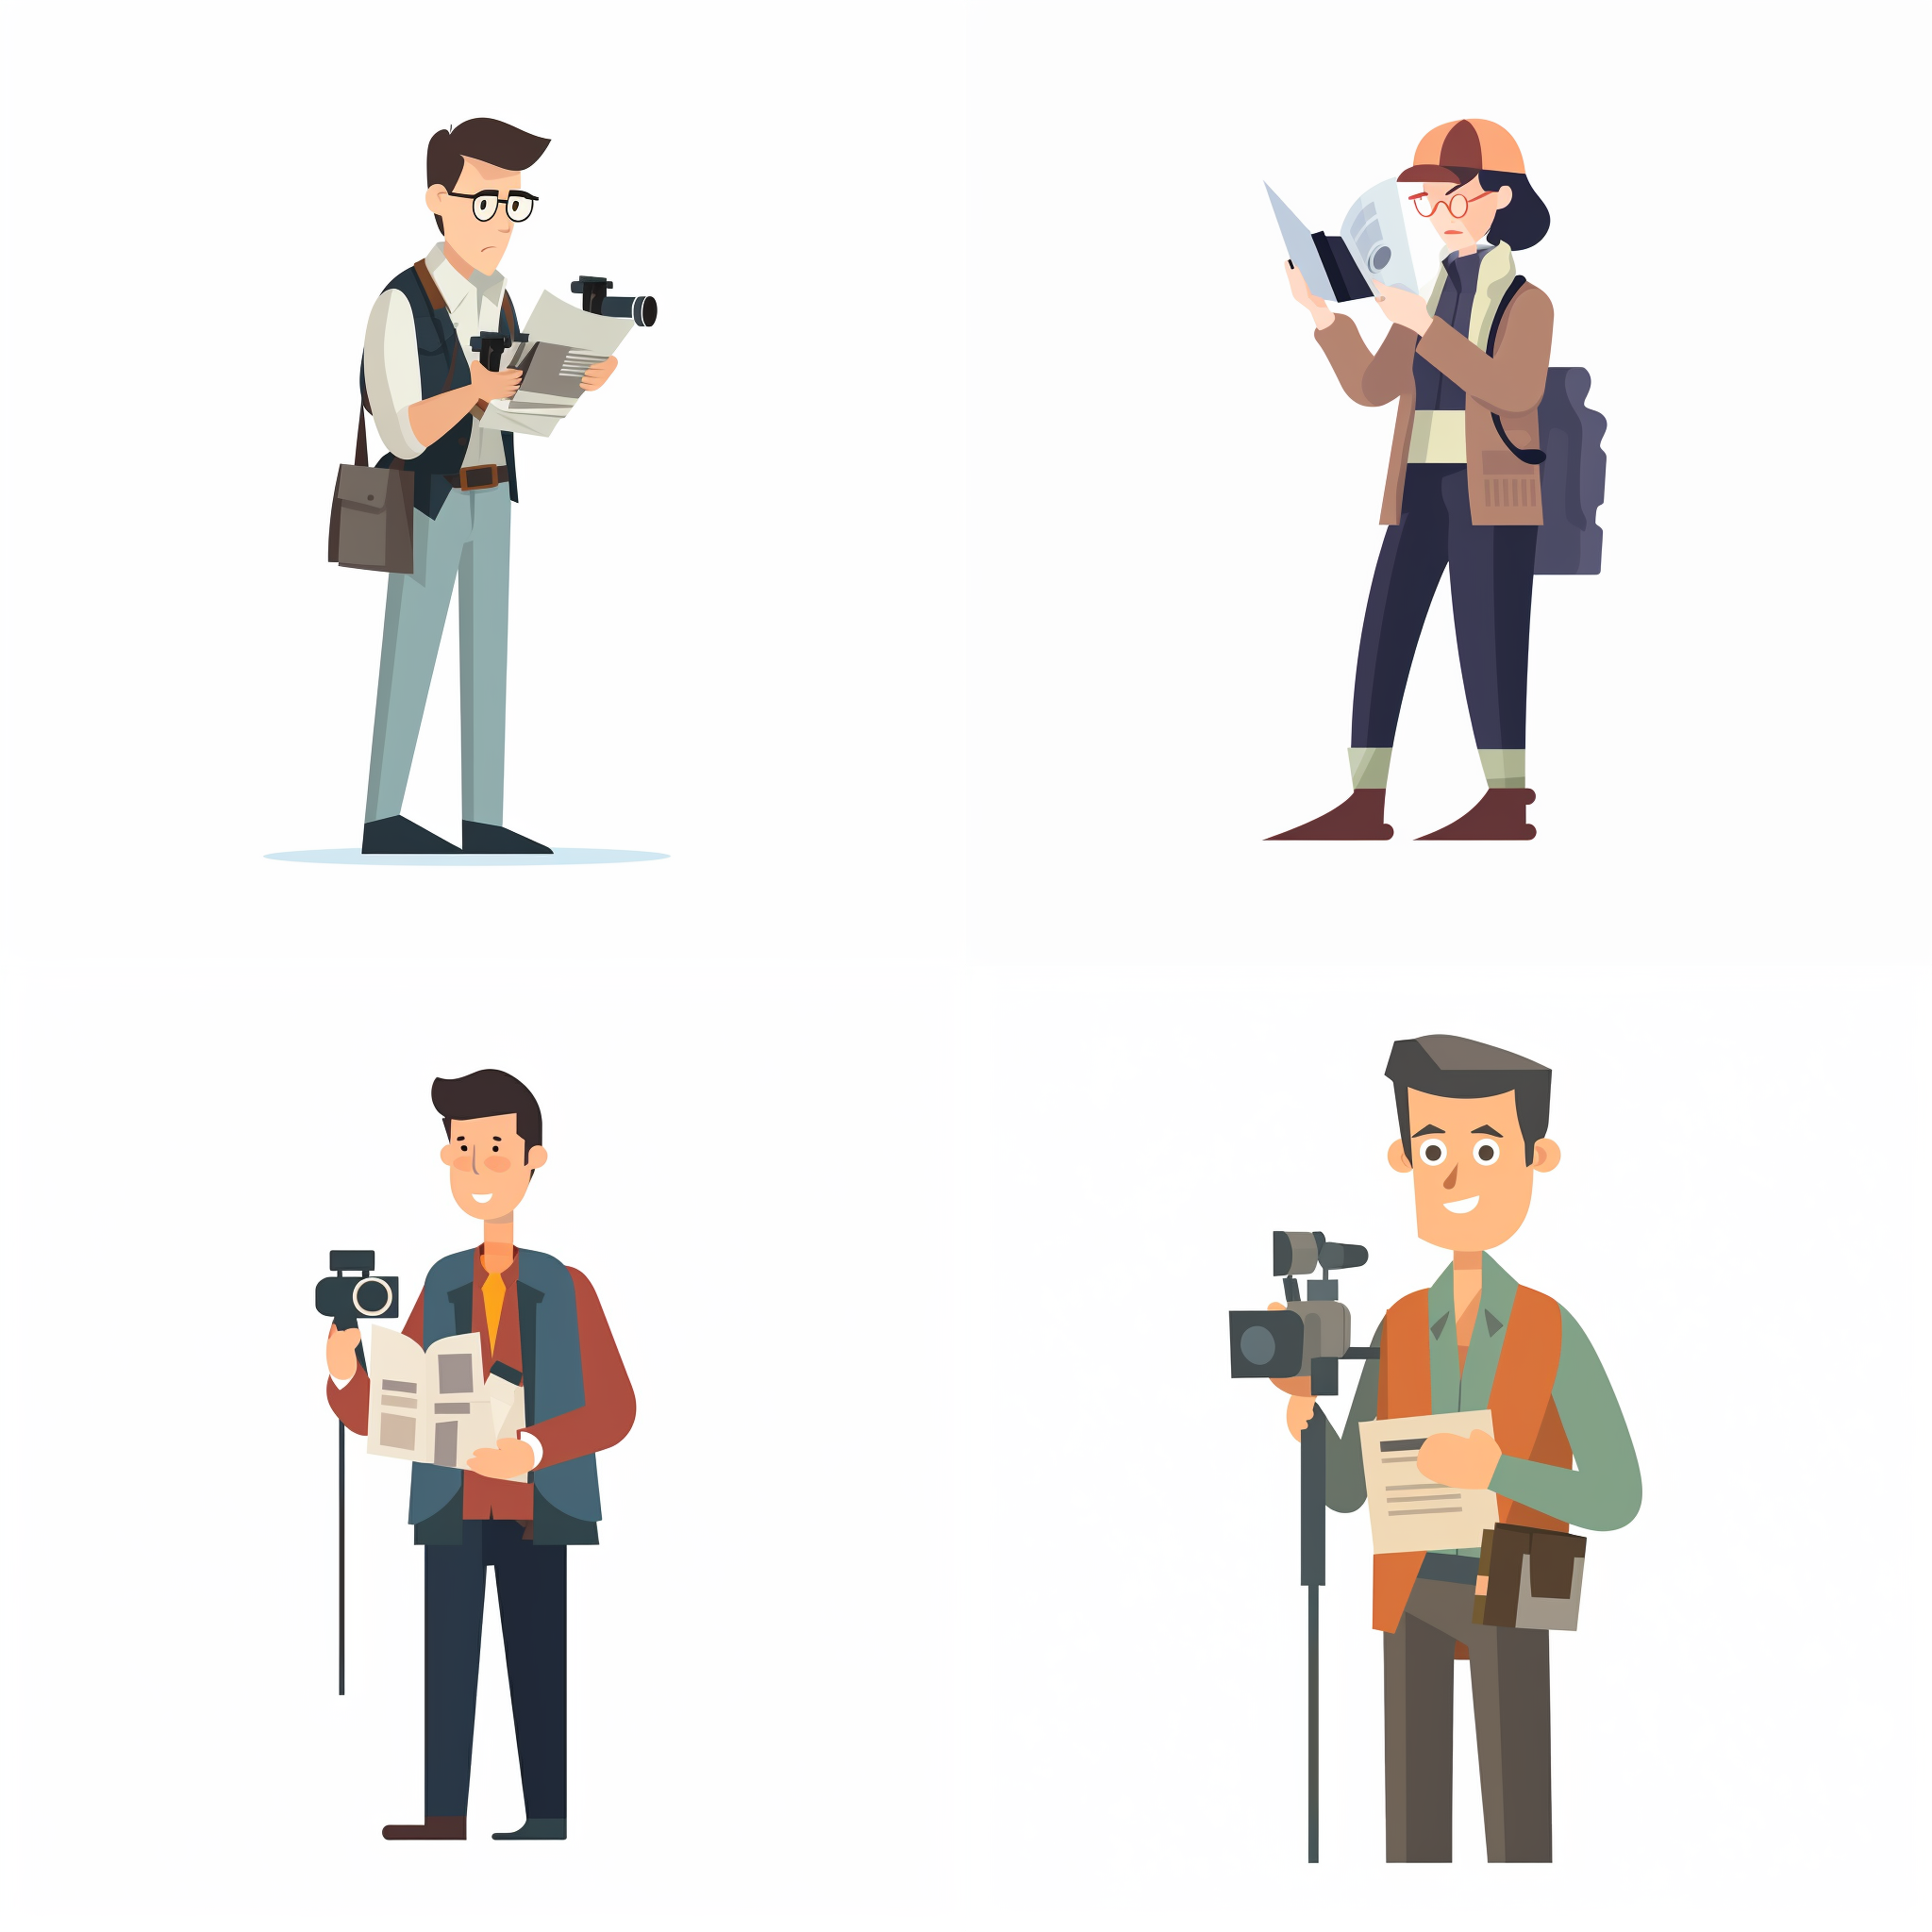 colorvivo journalist asset 2d flat vector graphics white backgr f4068735 fac7 4f93 8551 1f9a0110ee28 1